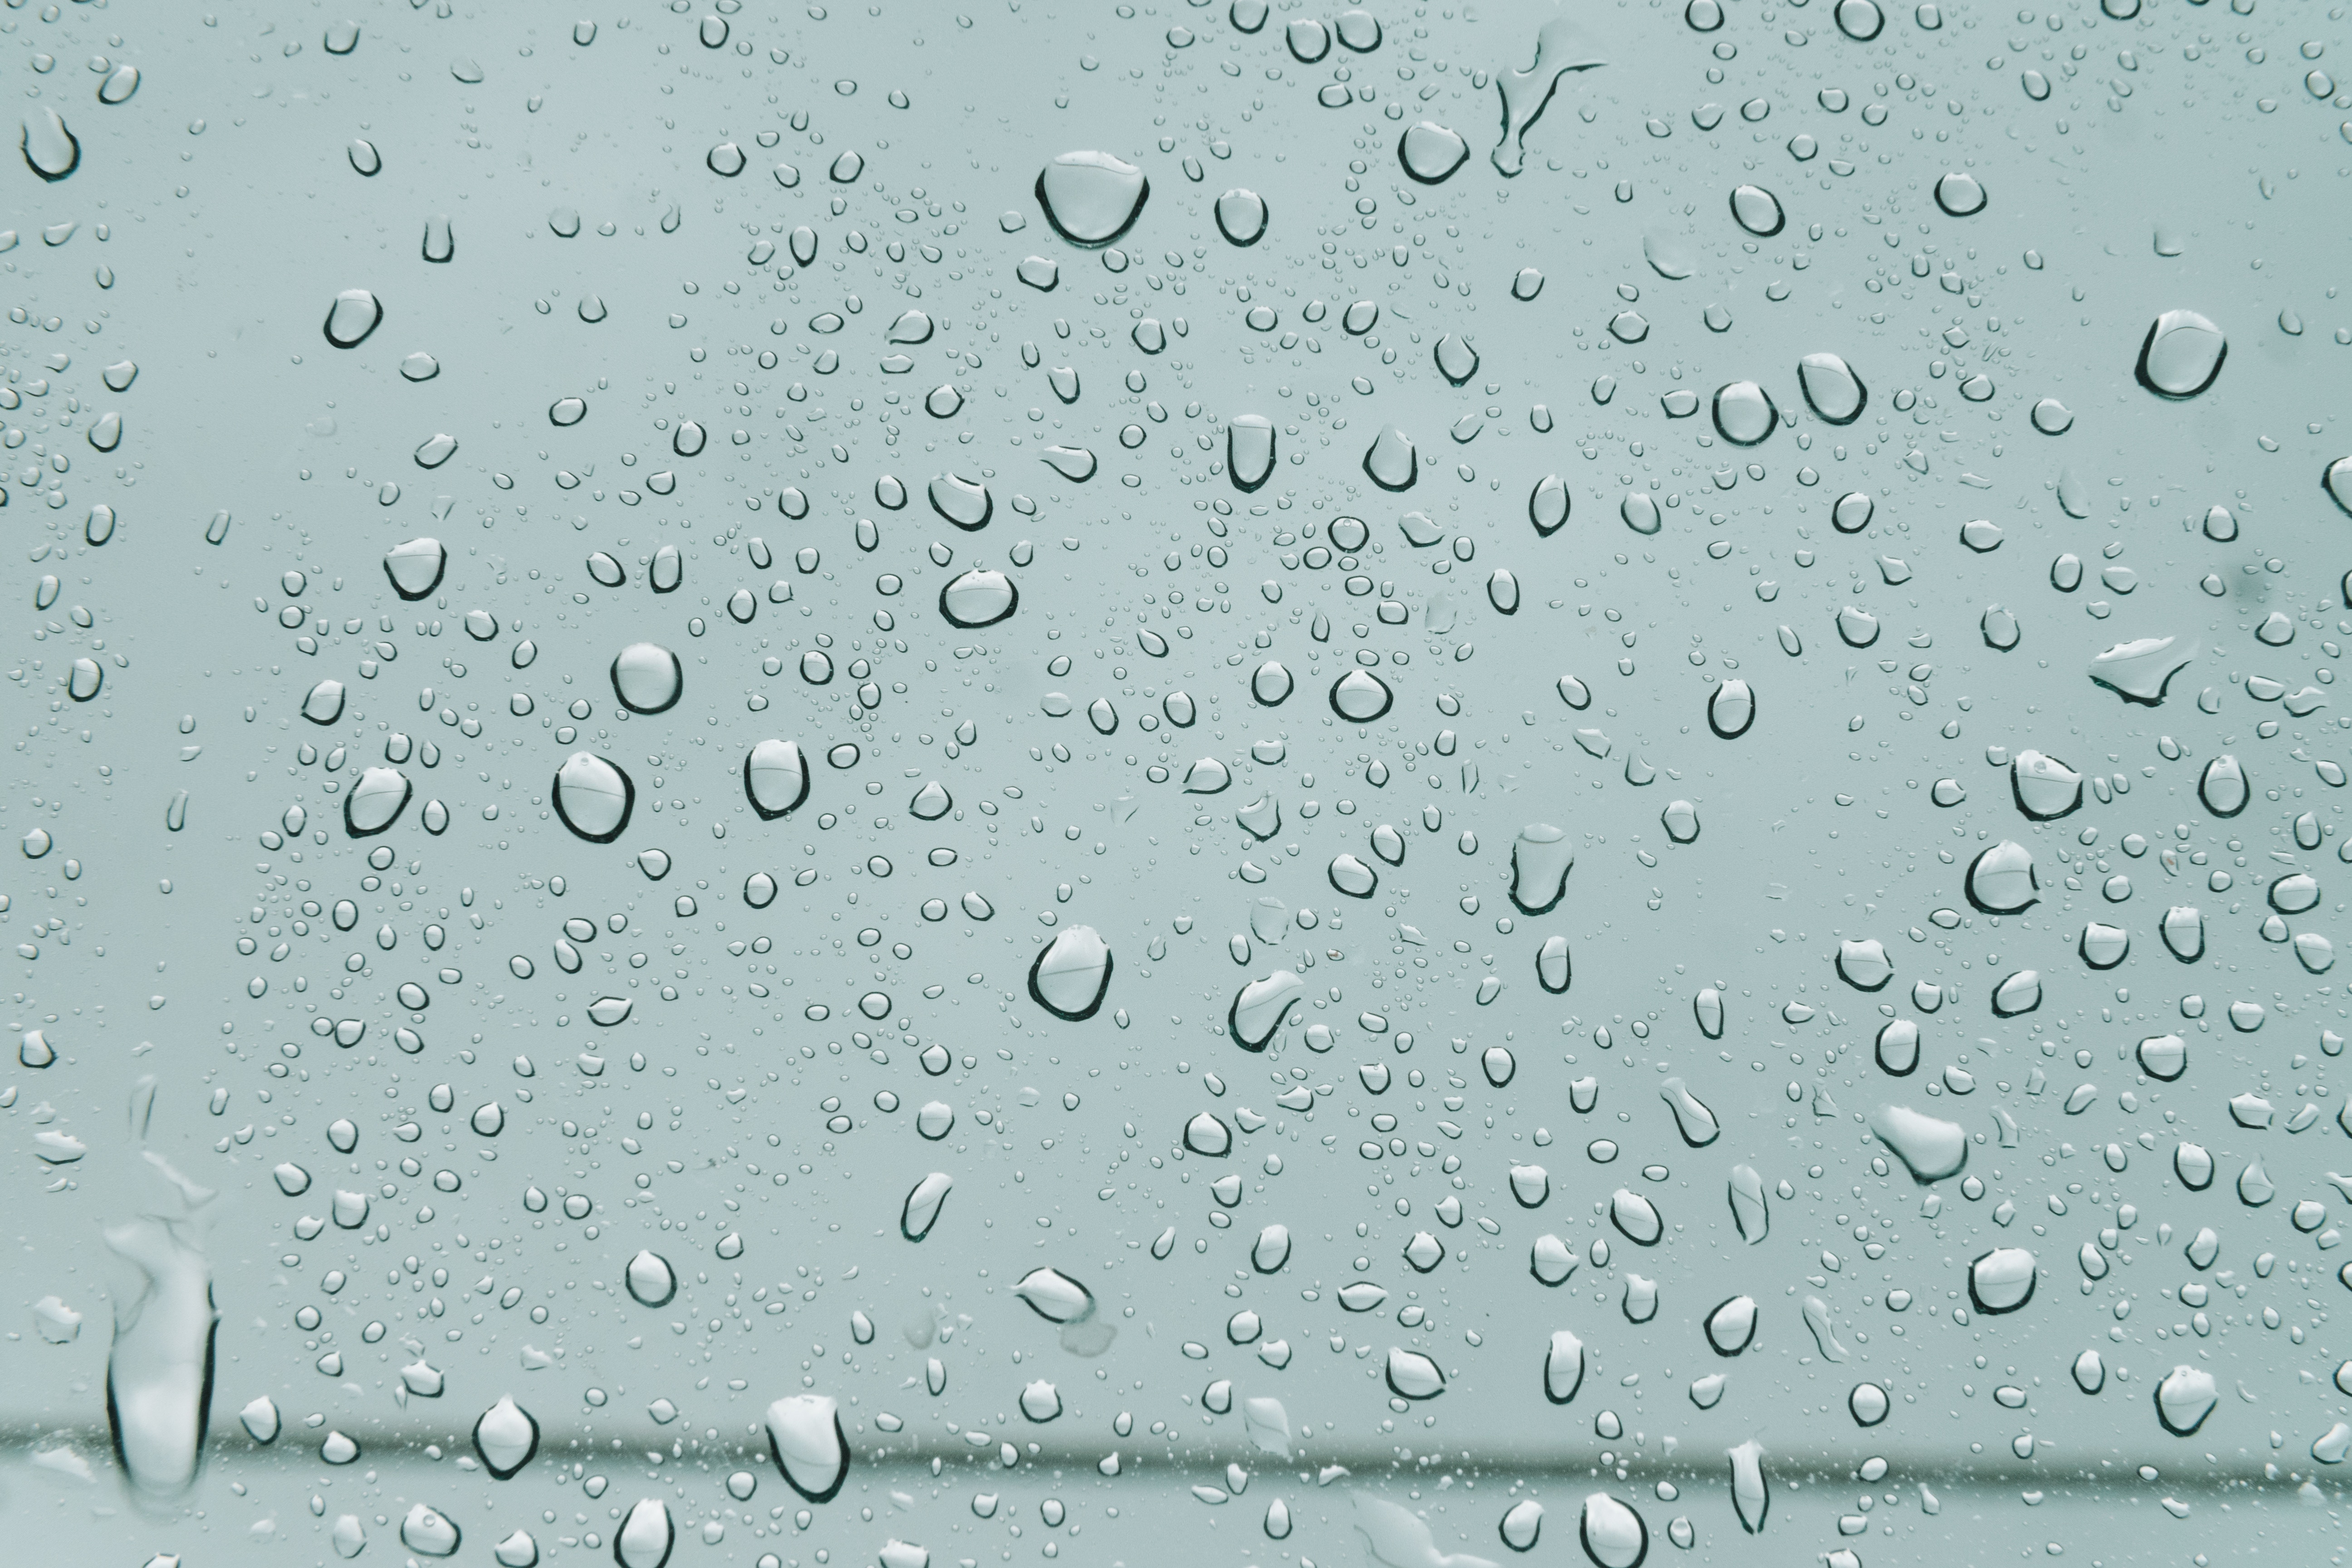 form, forms, rain, surface, drops, macro, wet, moisture, humid iphone wallpaper